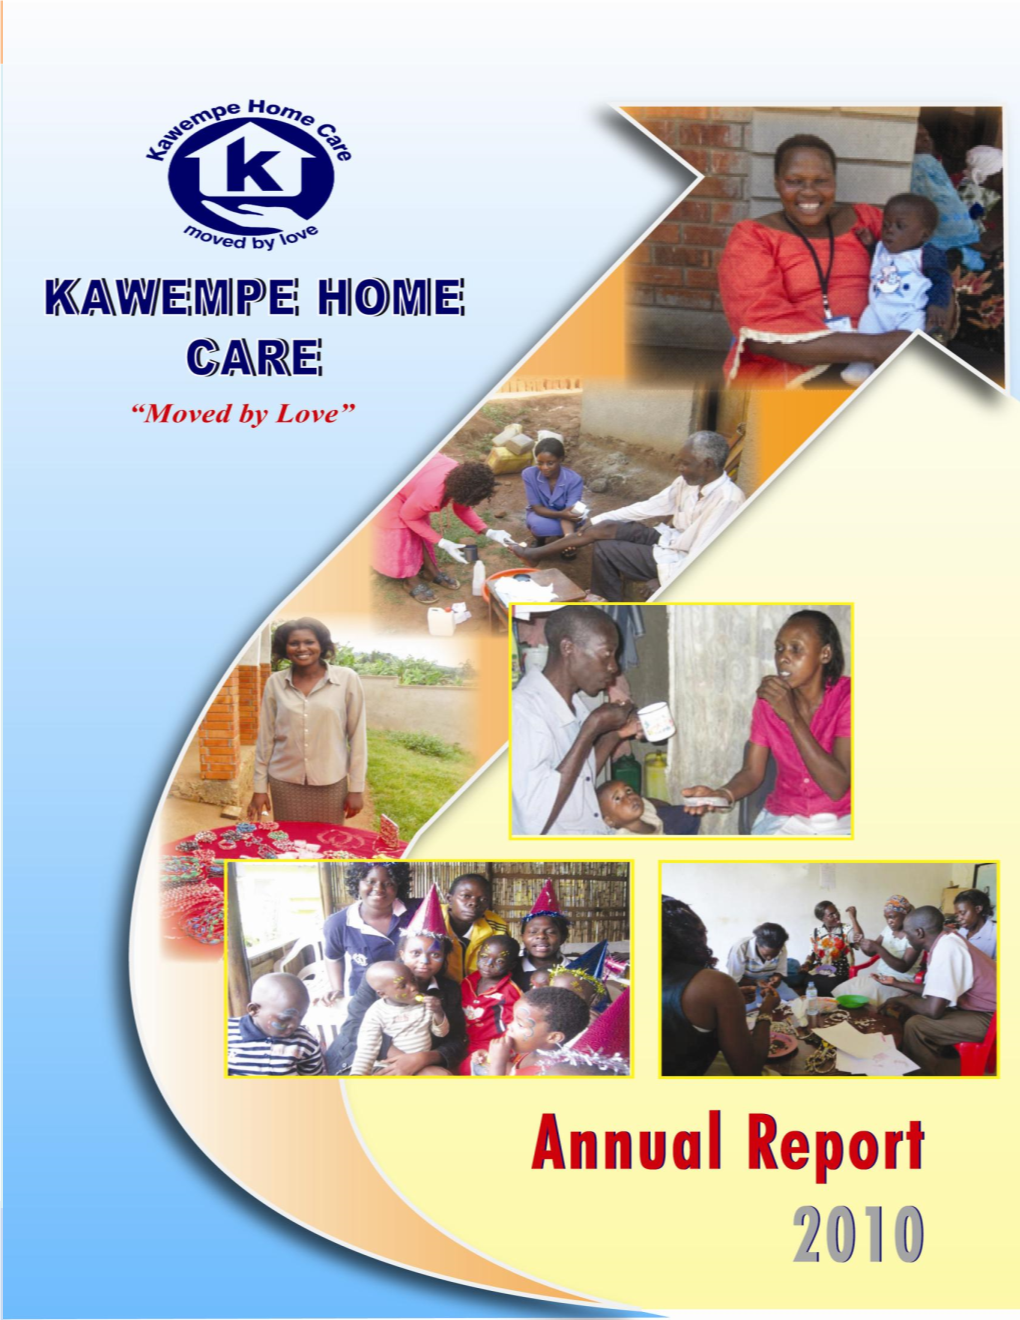 Kawempe Home Care Annual Report 2010